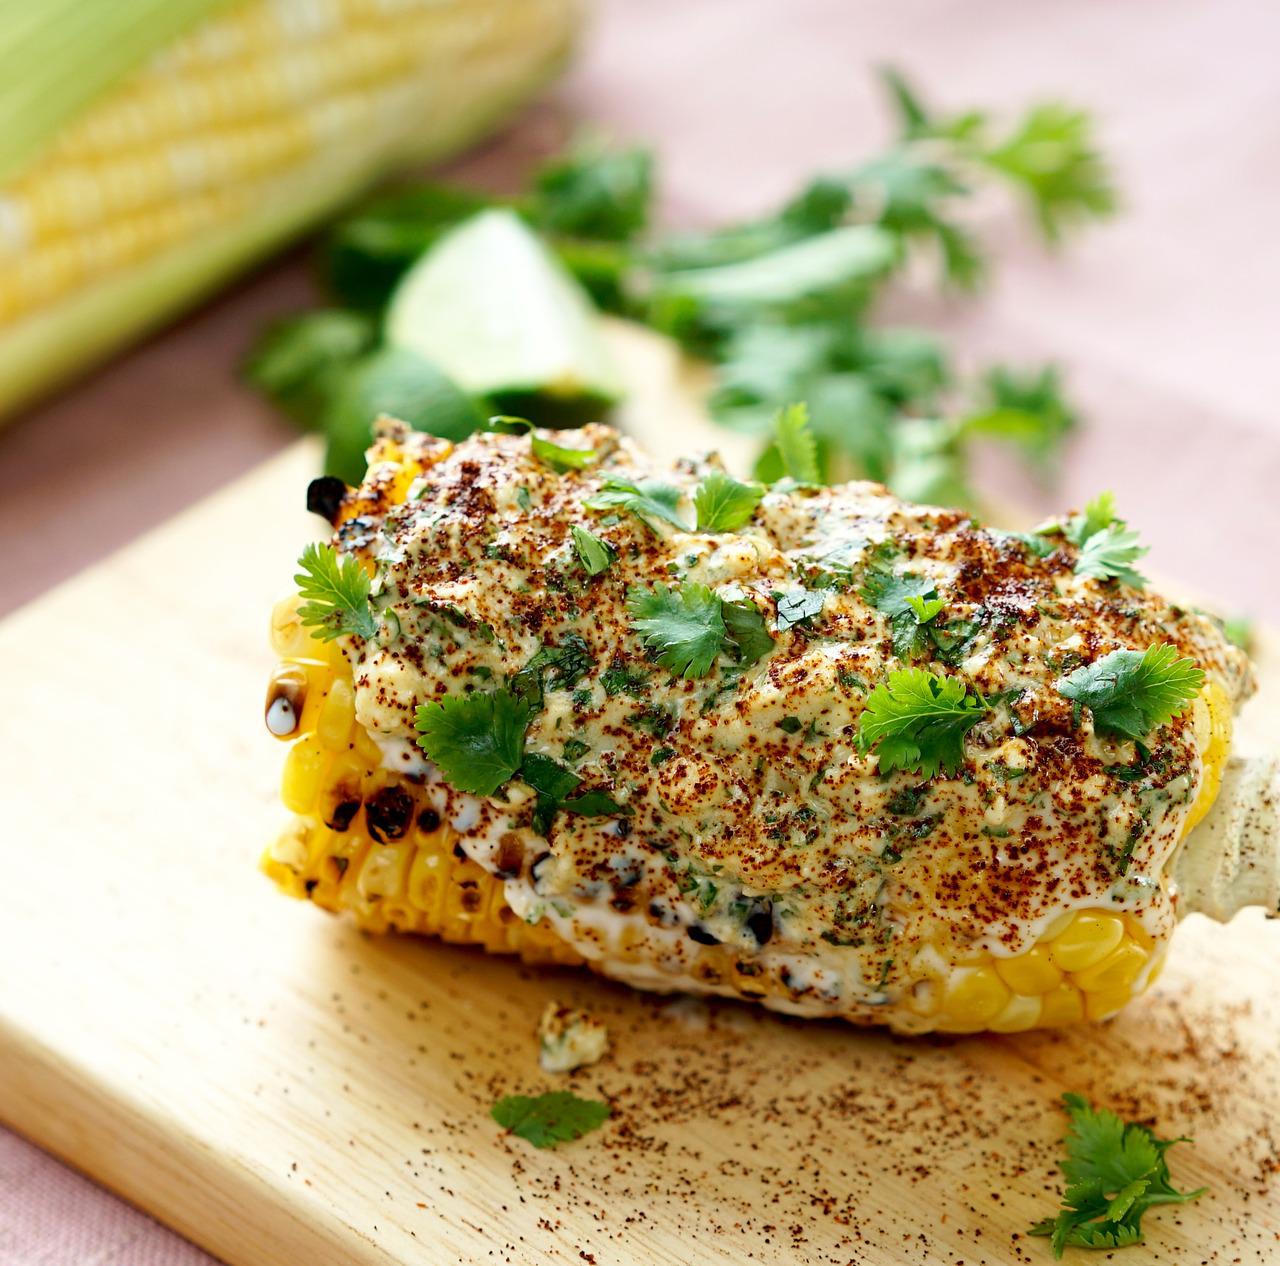 Simple Grilled Corn Recipe You Should Know